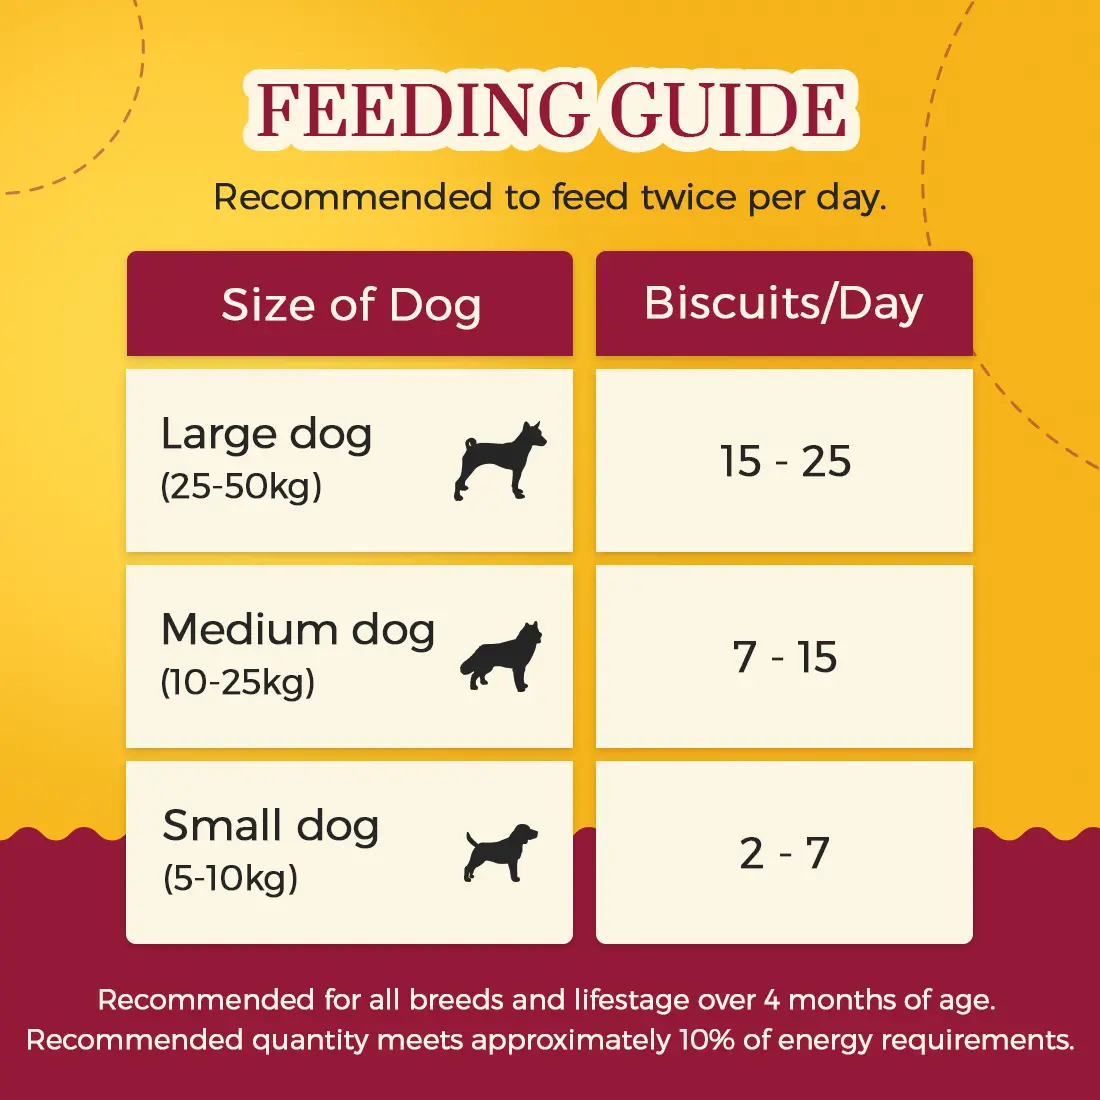 Feeding Guide - Apple and Peanut Cookies for Dogs